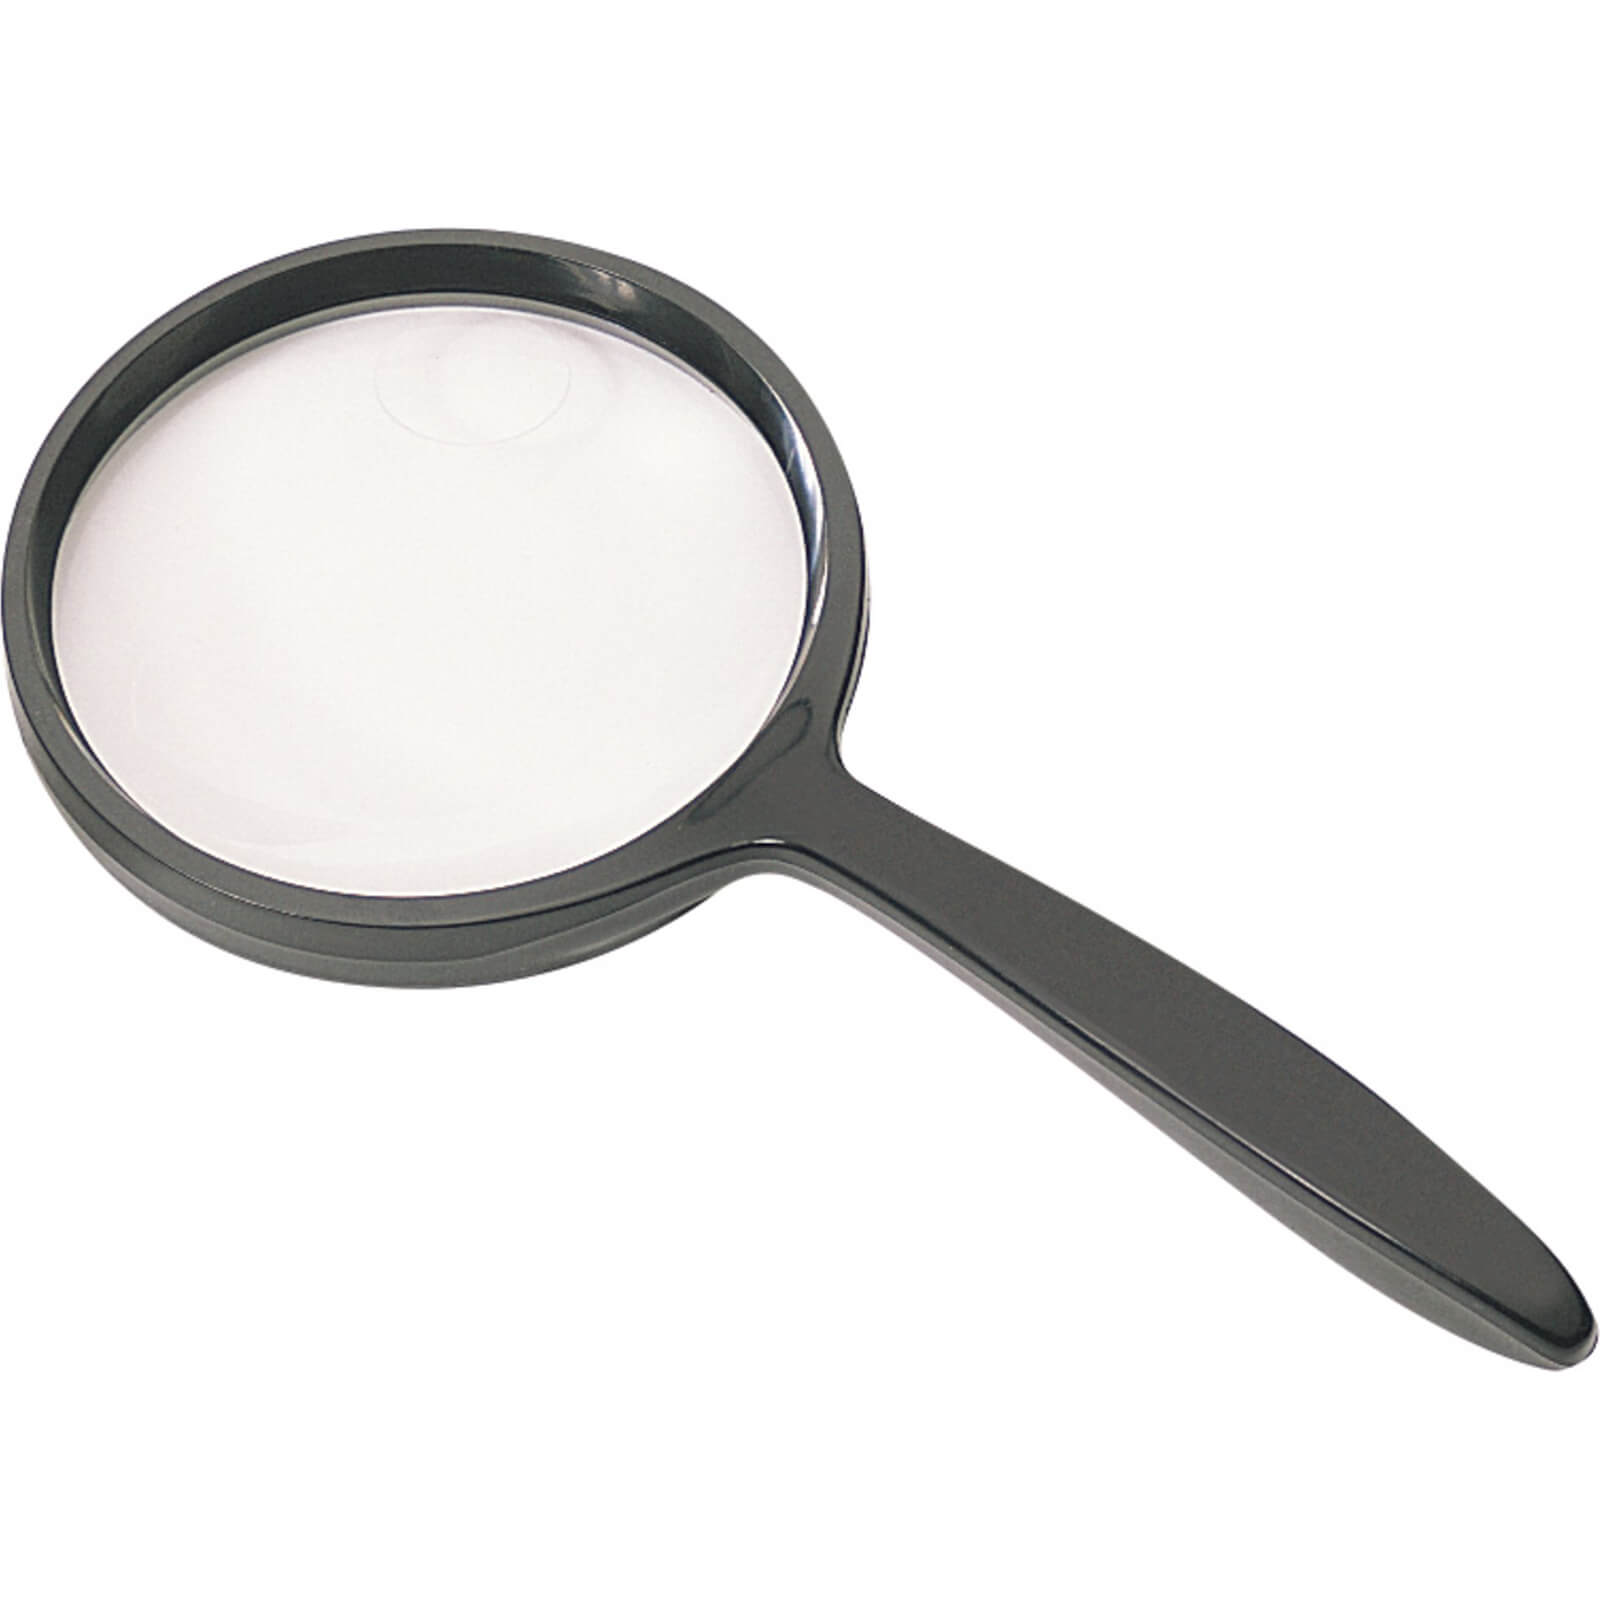 Image of Draper 3x Round Magnifying Glass 75mm